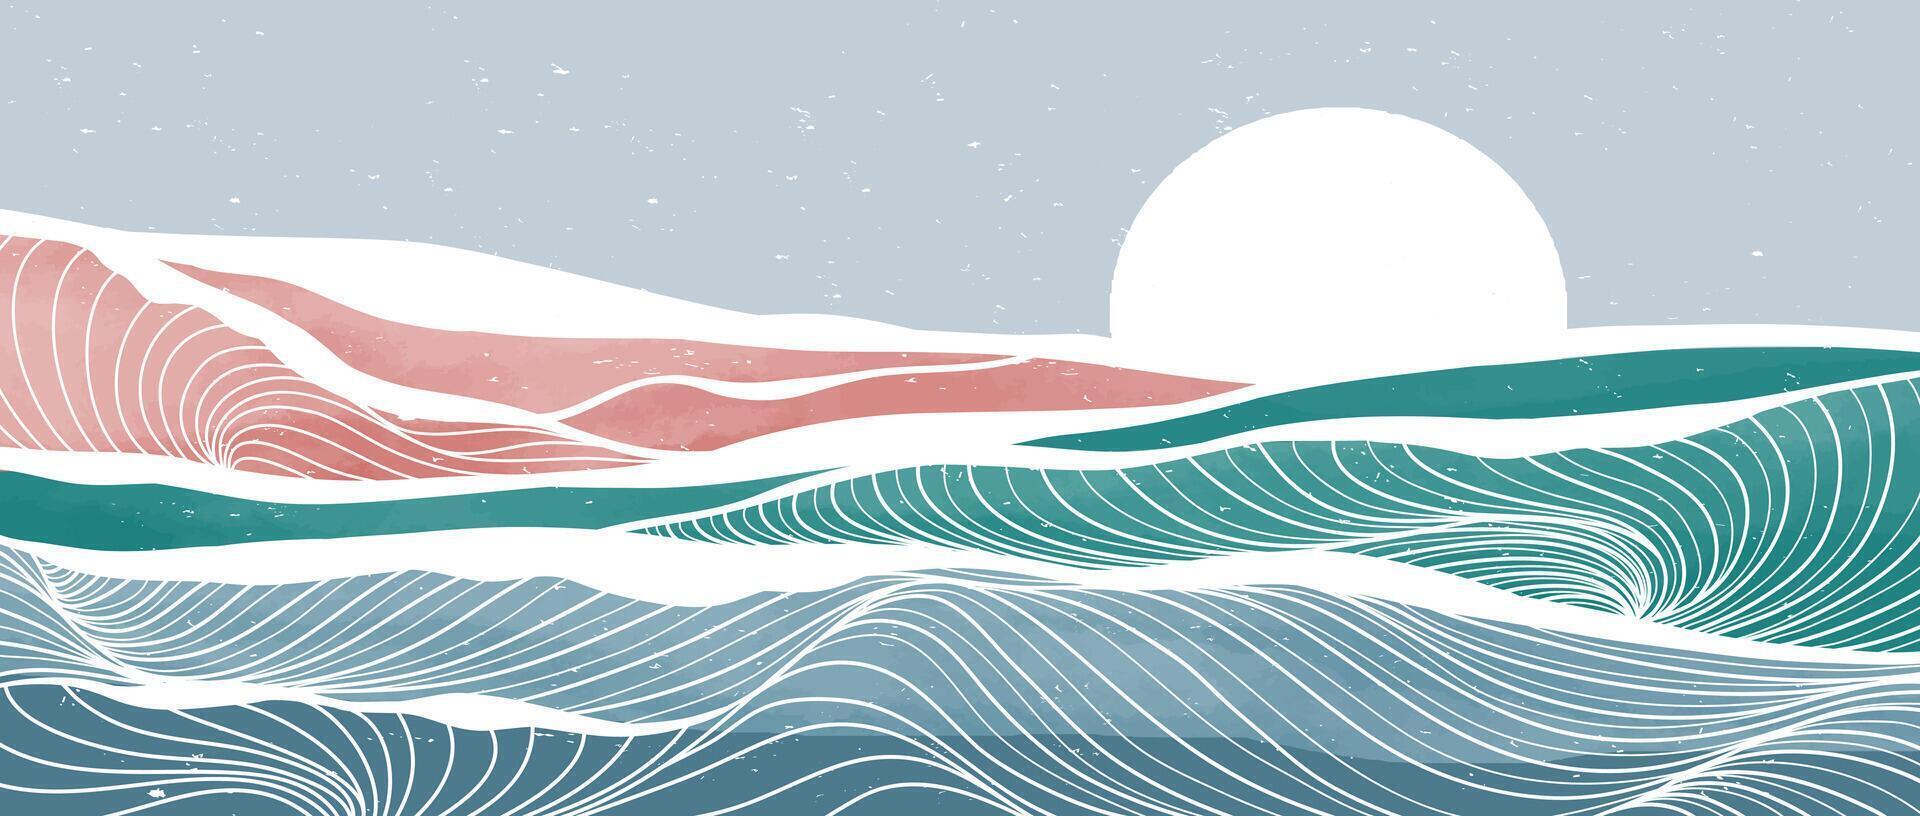 Ocean waves illustrations. Creative minimalist modern paint and line art print. Abstract contemporary aesthetic backgrounds landscapes. with sea, skyline, wave vector